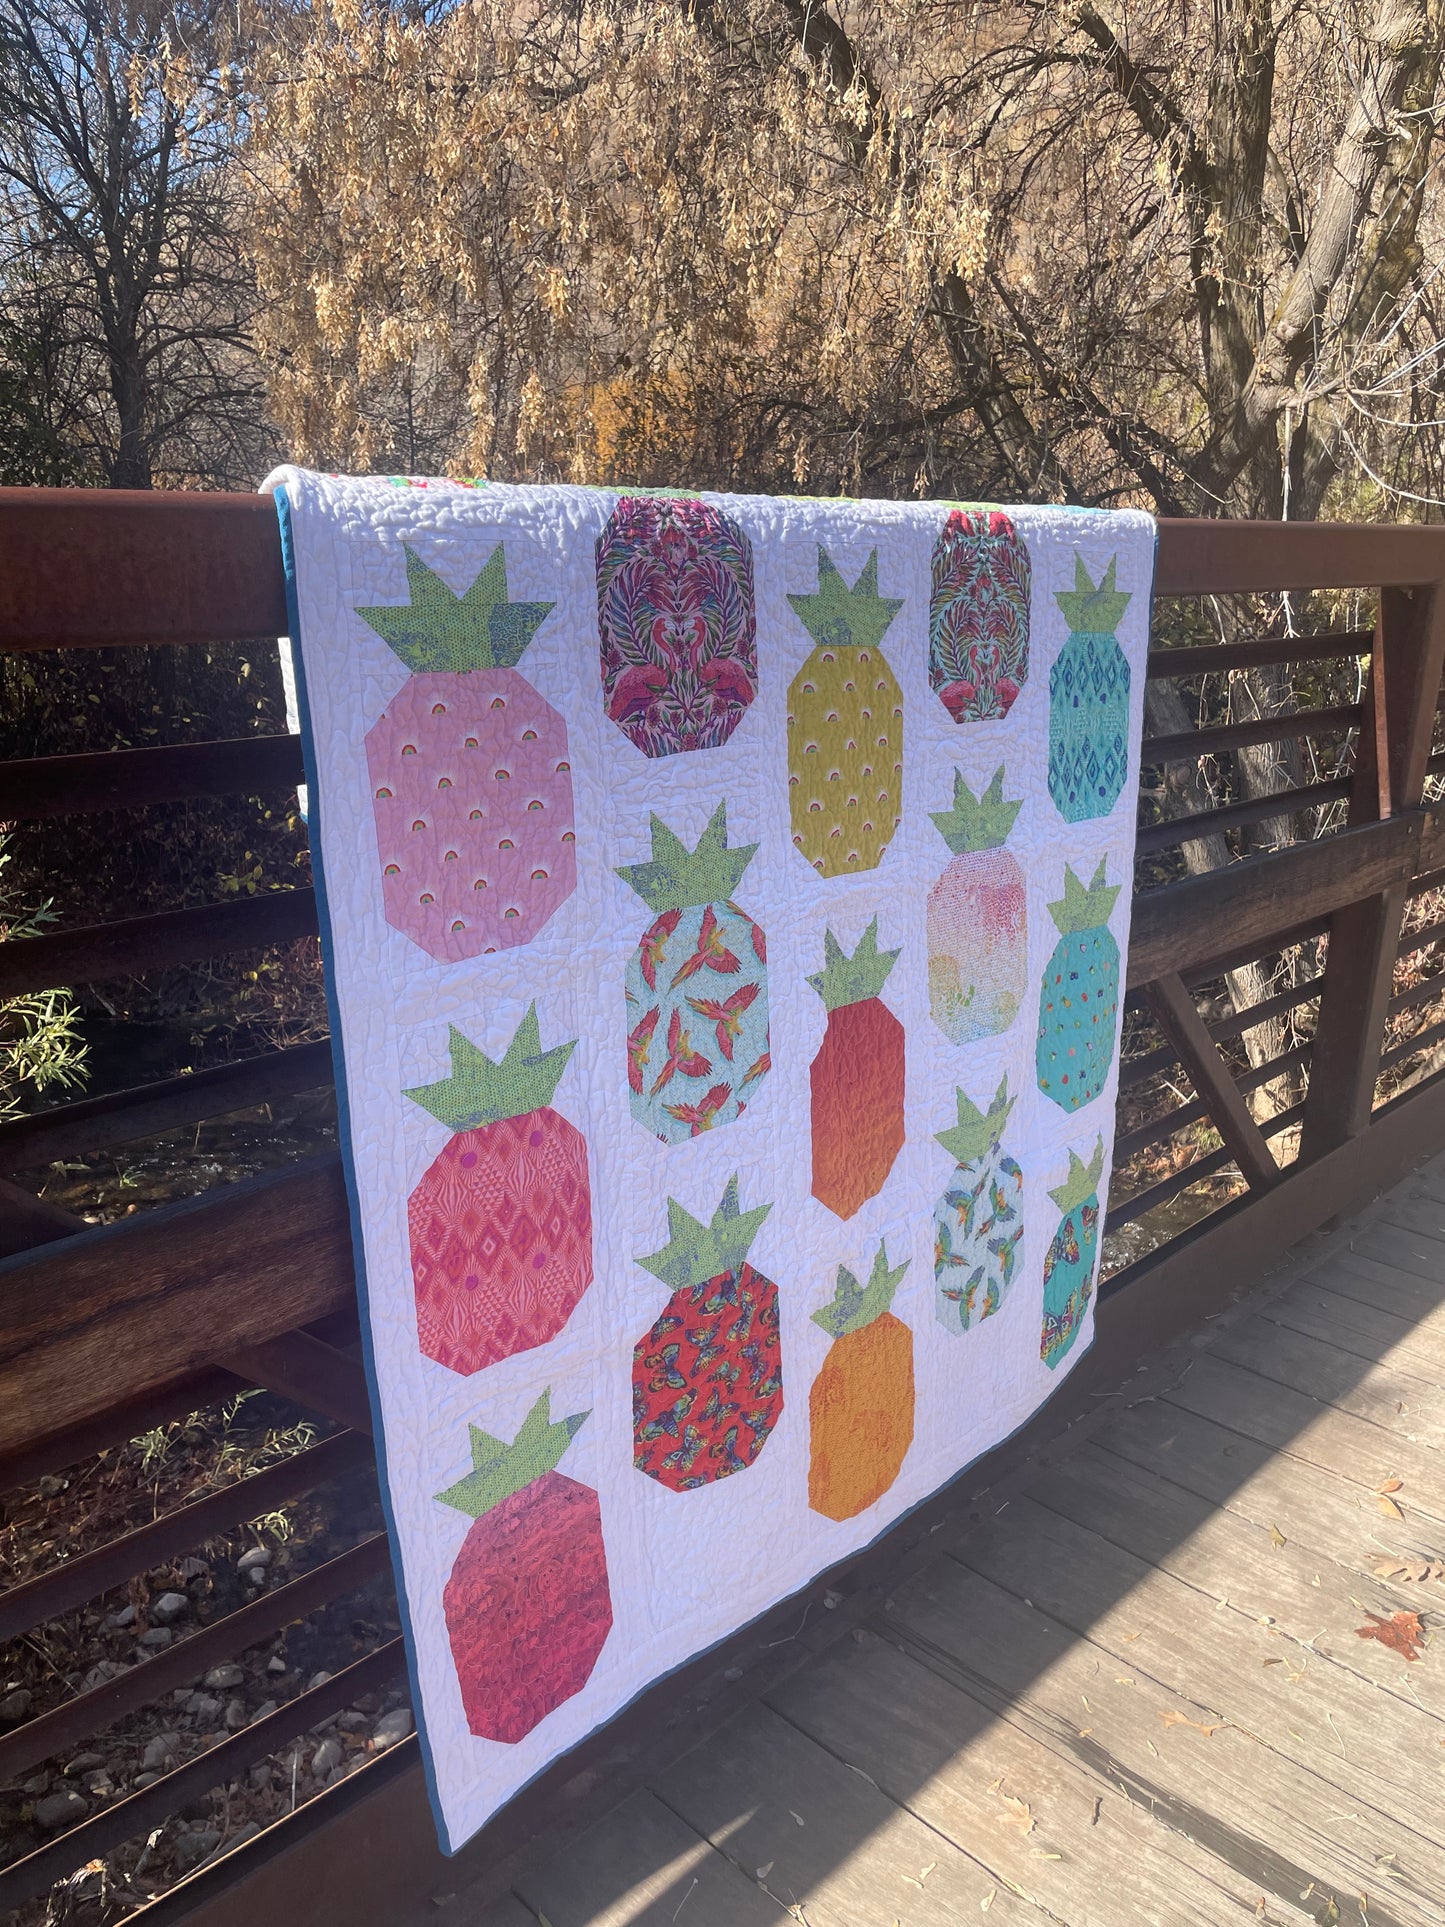 Pineapple Quilt - Hospitality